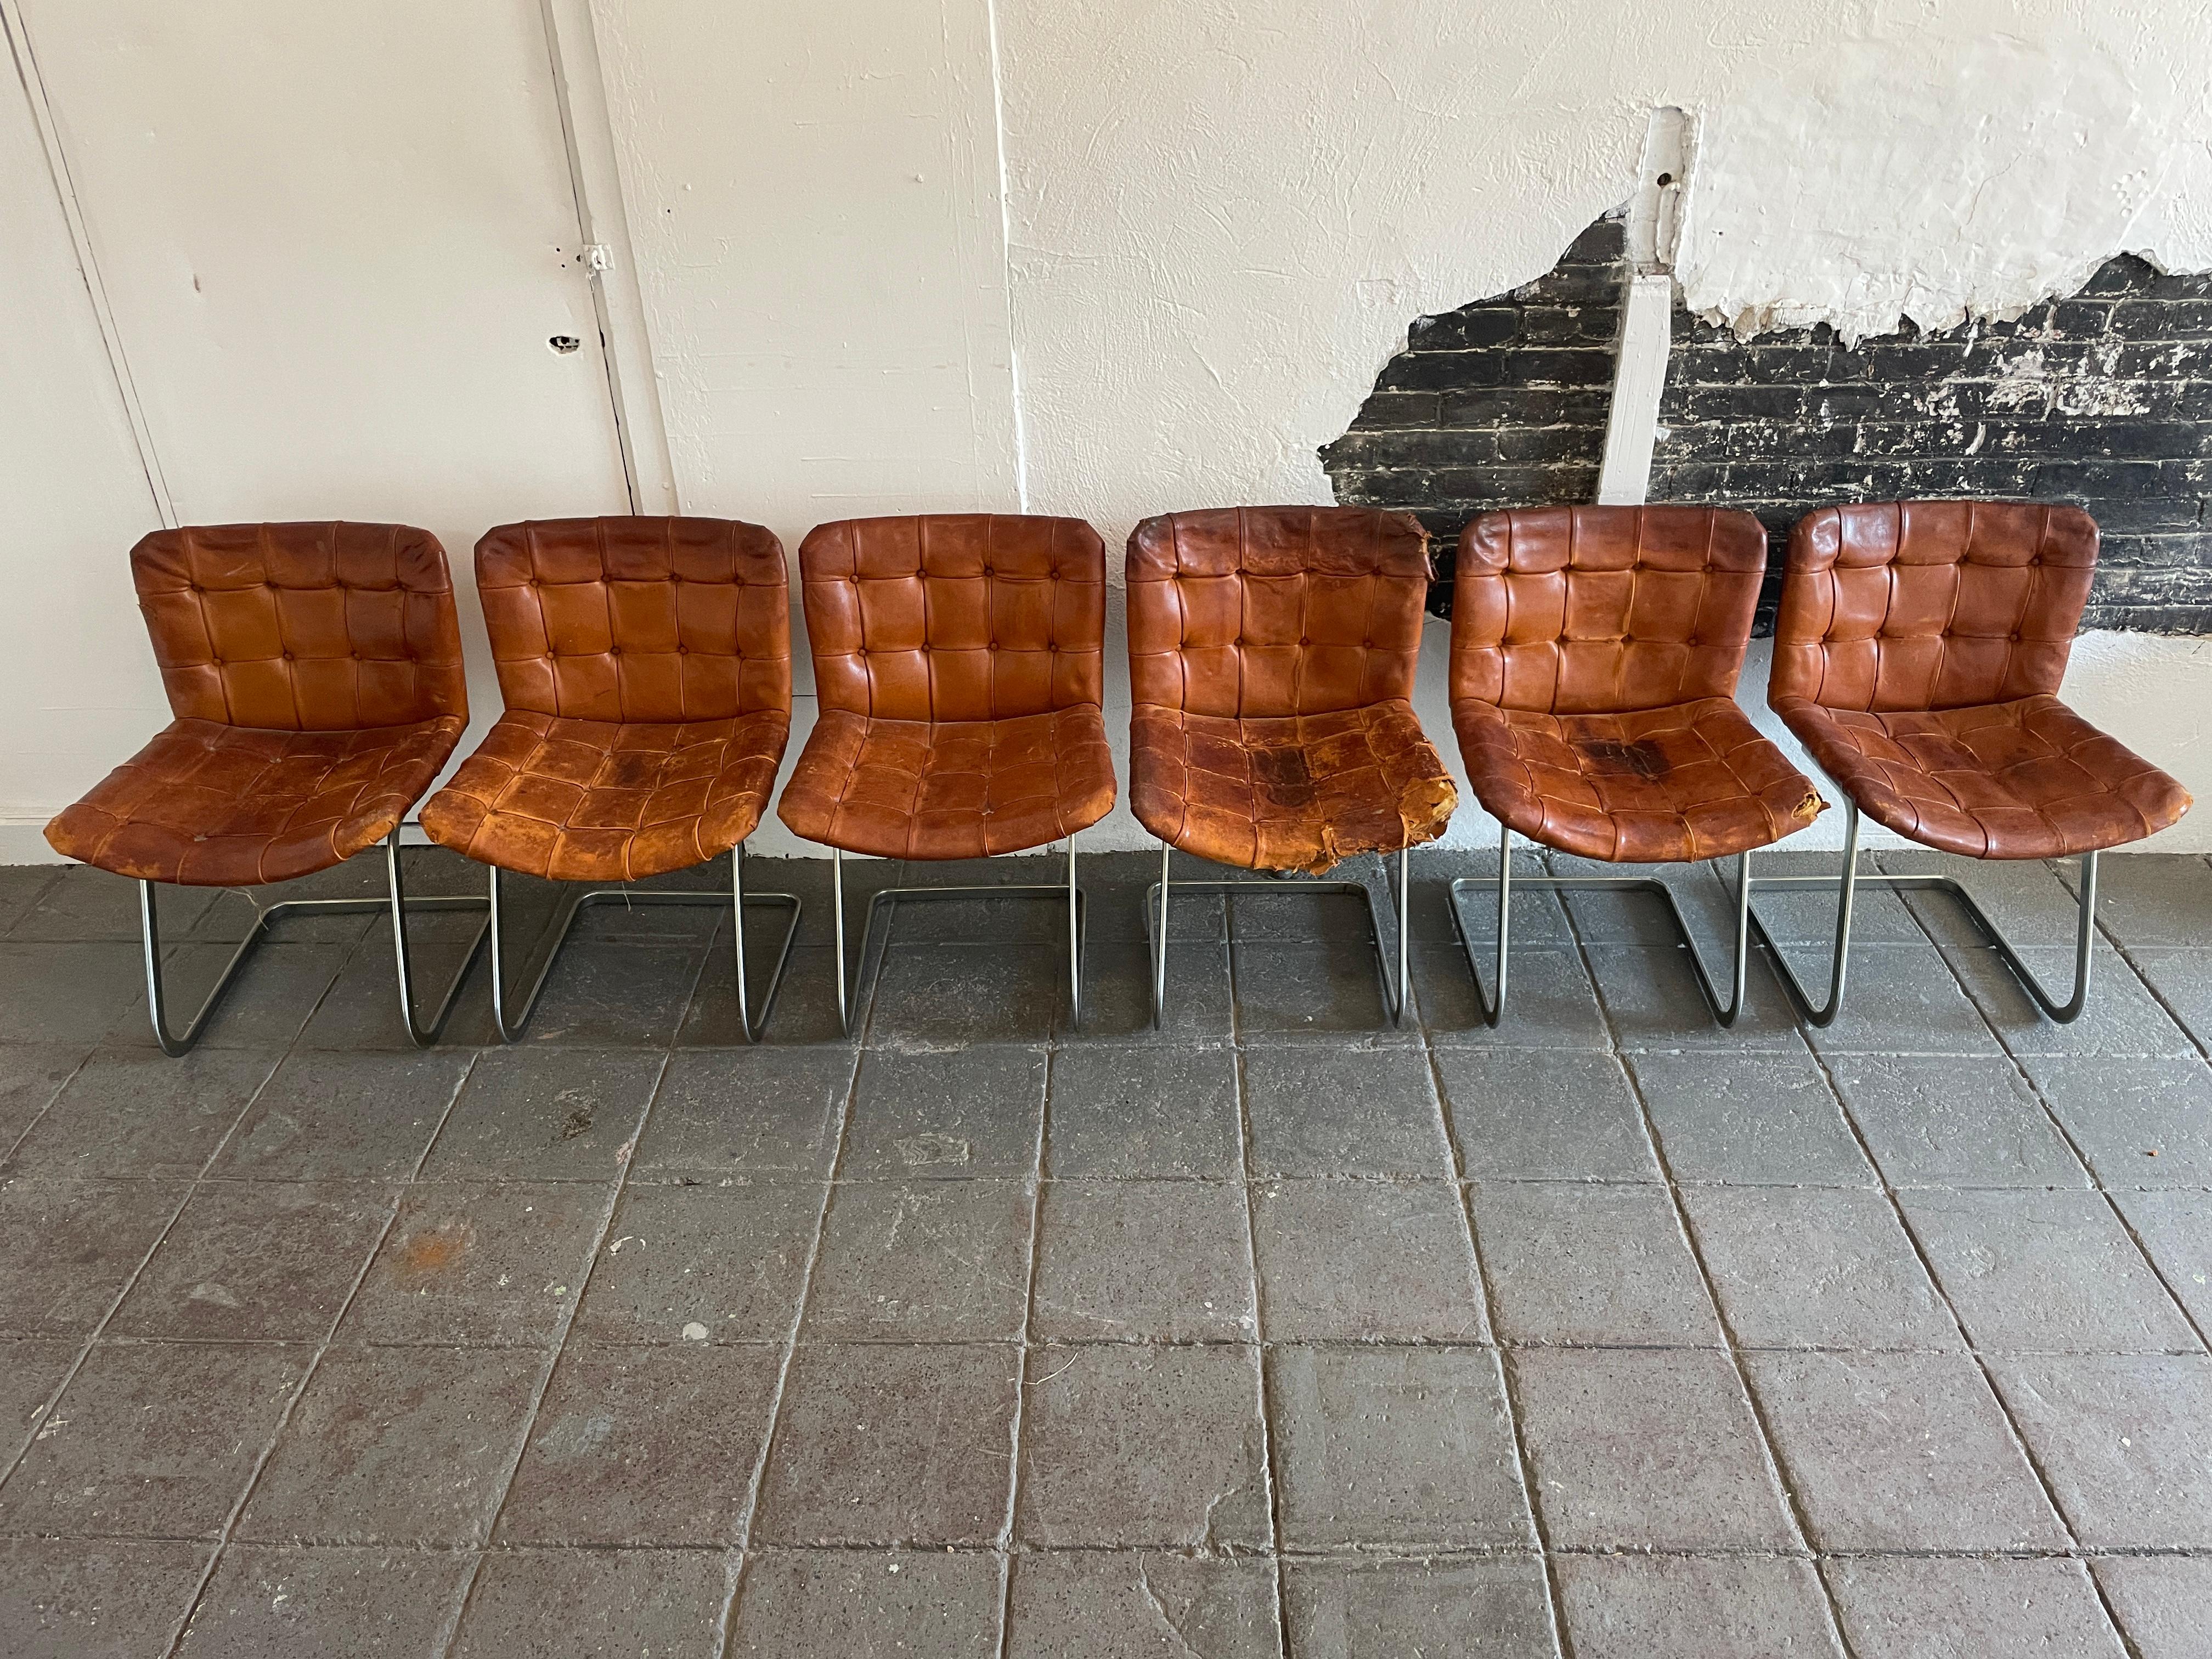 A unique set of six RH-304 leather chairs
designed by Robert Haussmann and manufactured by Stendig / de sede. This set is hand built in the 1960s, these chairs are upholstered in saddle brown leather with some tears. The frames are made of